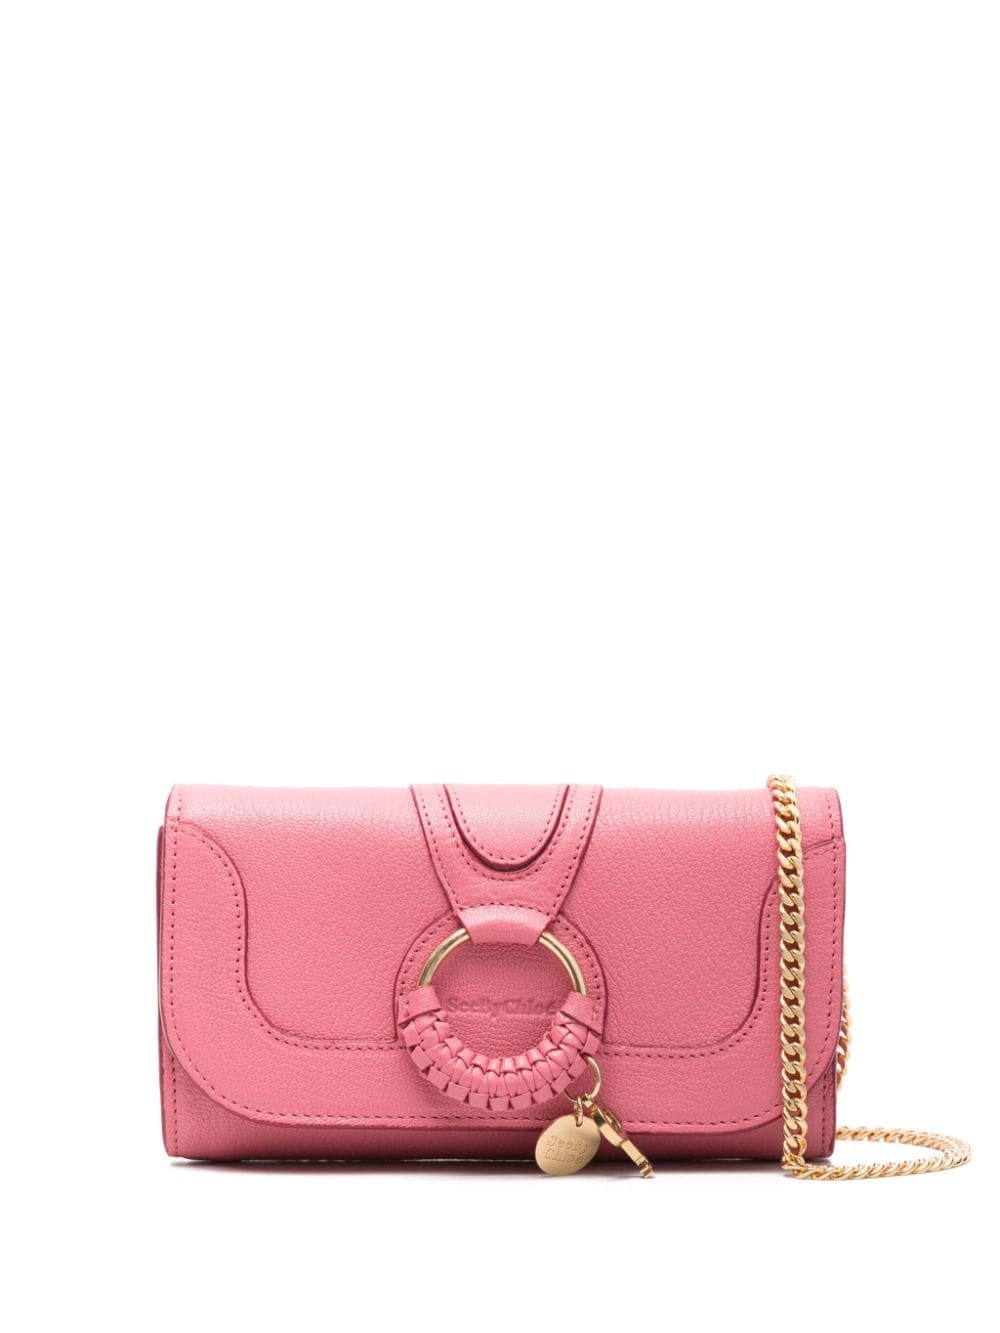 See by Chloé Hana leather chain wallet - Pink von See by Chloé